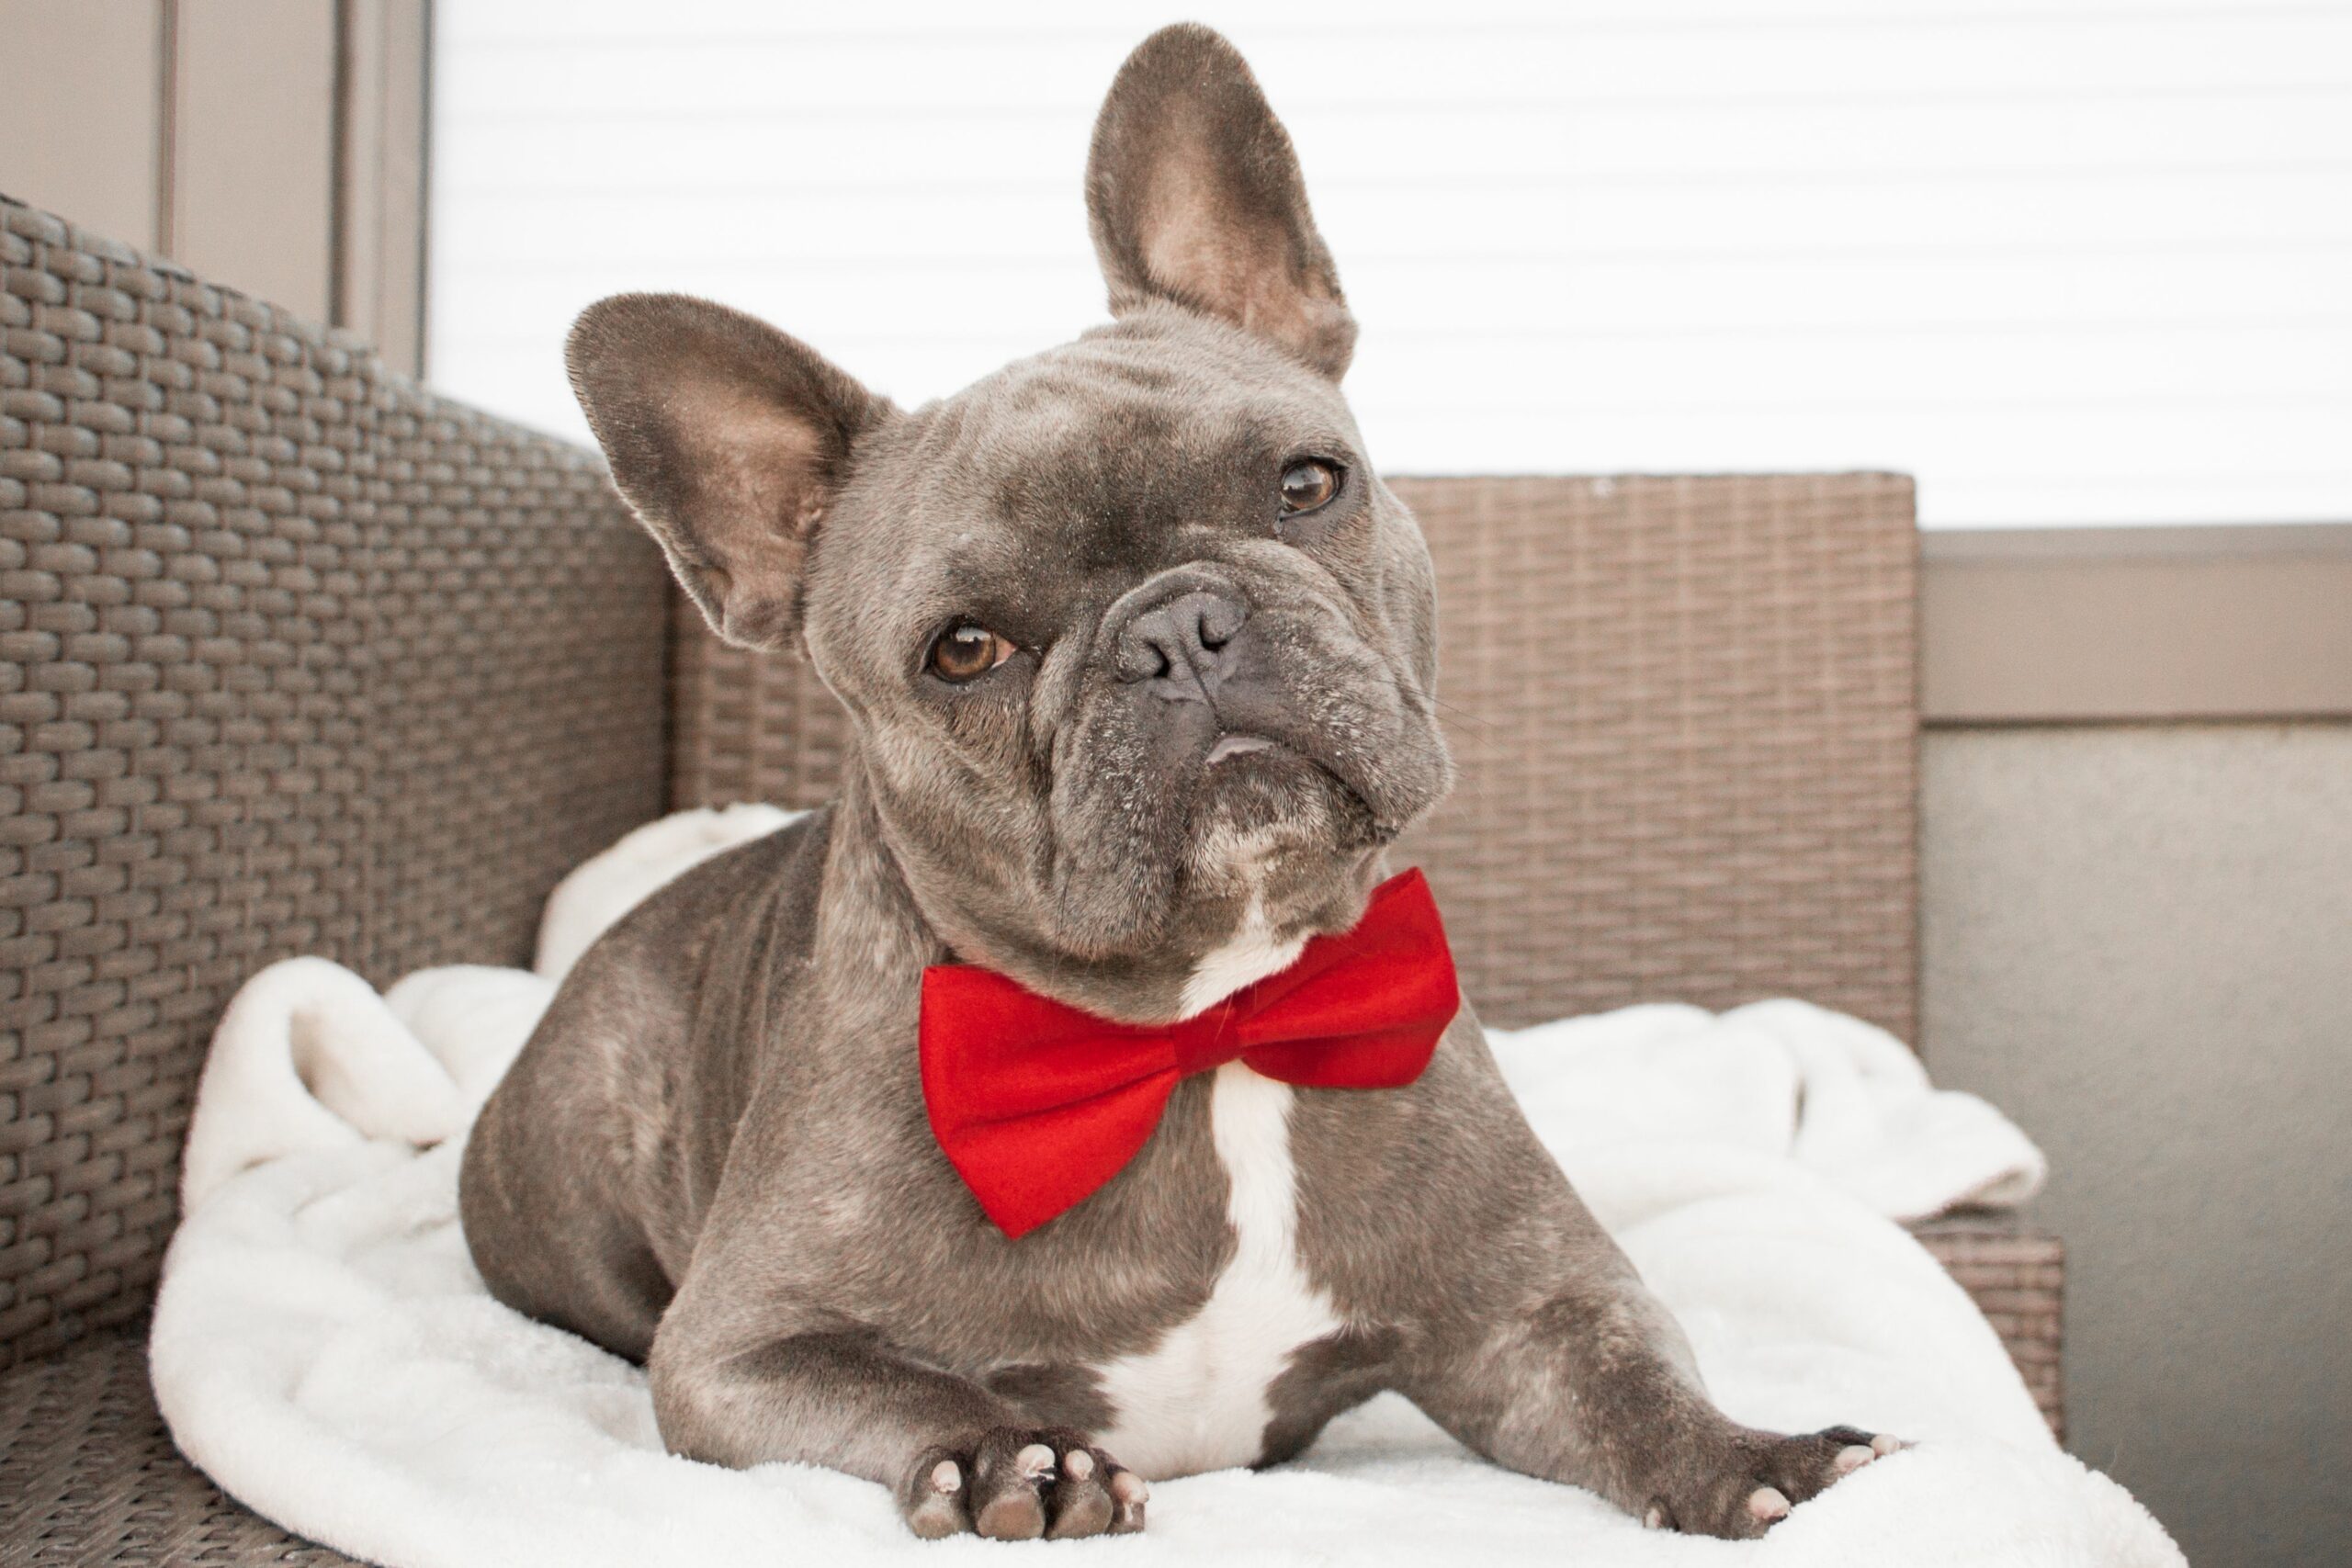 Frenchbulldogwithbowtie 5fb0cbcbc29b43868a5d54f11a2acd52 scaled